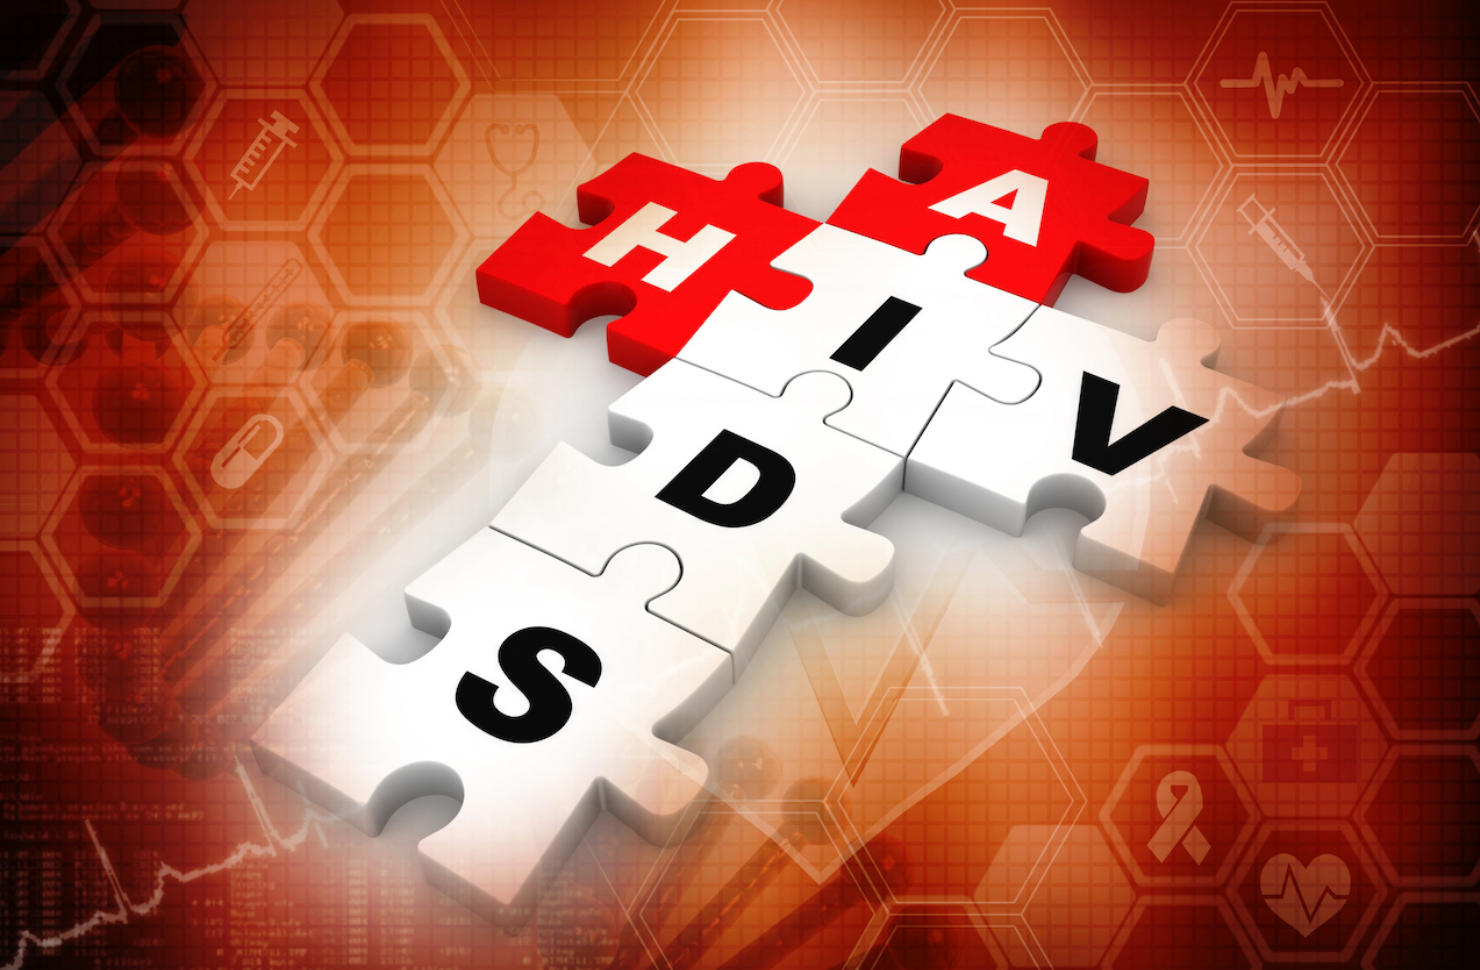 Lenacapavir Shows Efficacy as Long-Acting Agent in Combination Regimen For HIV 